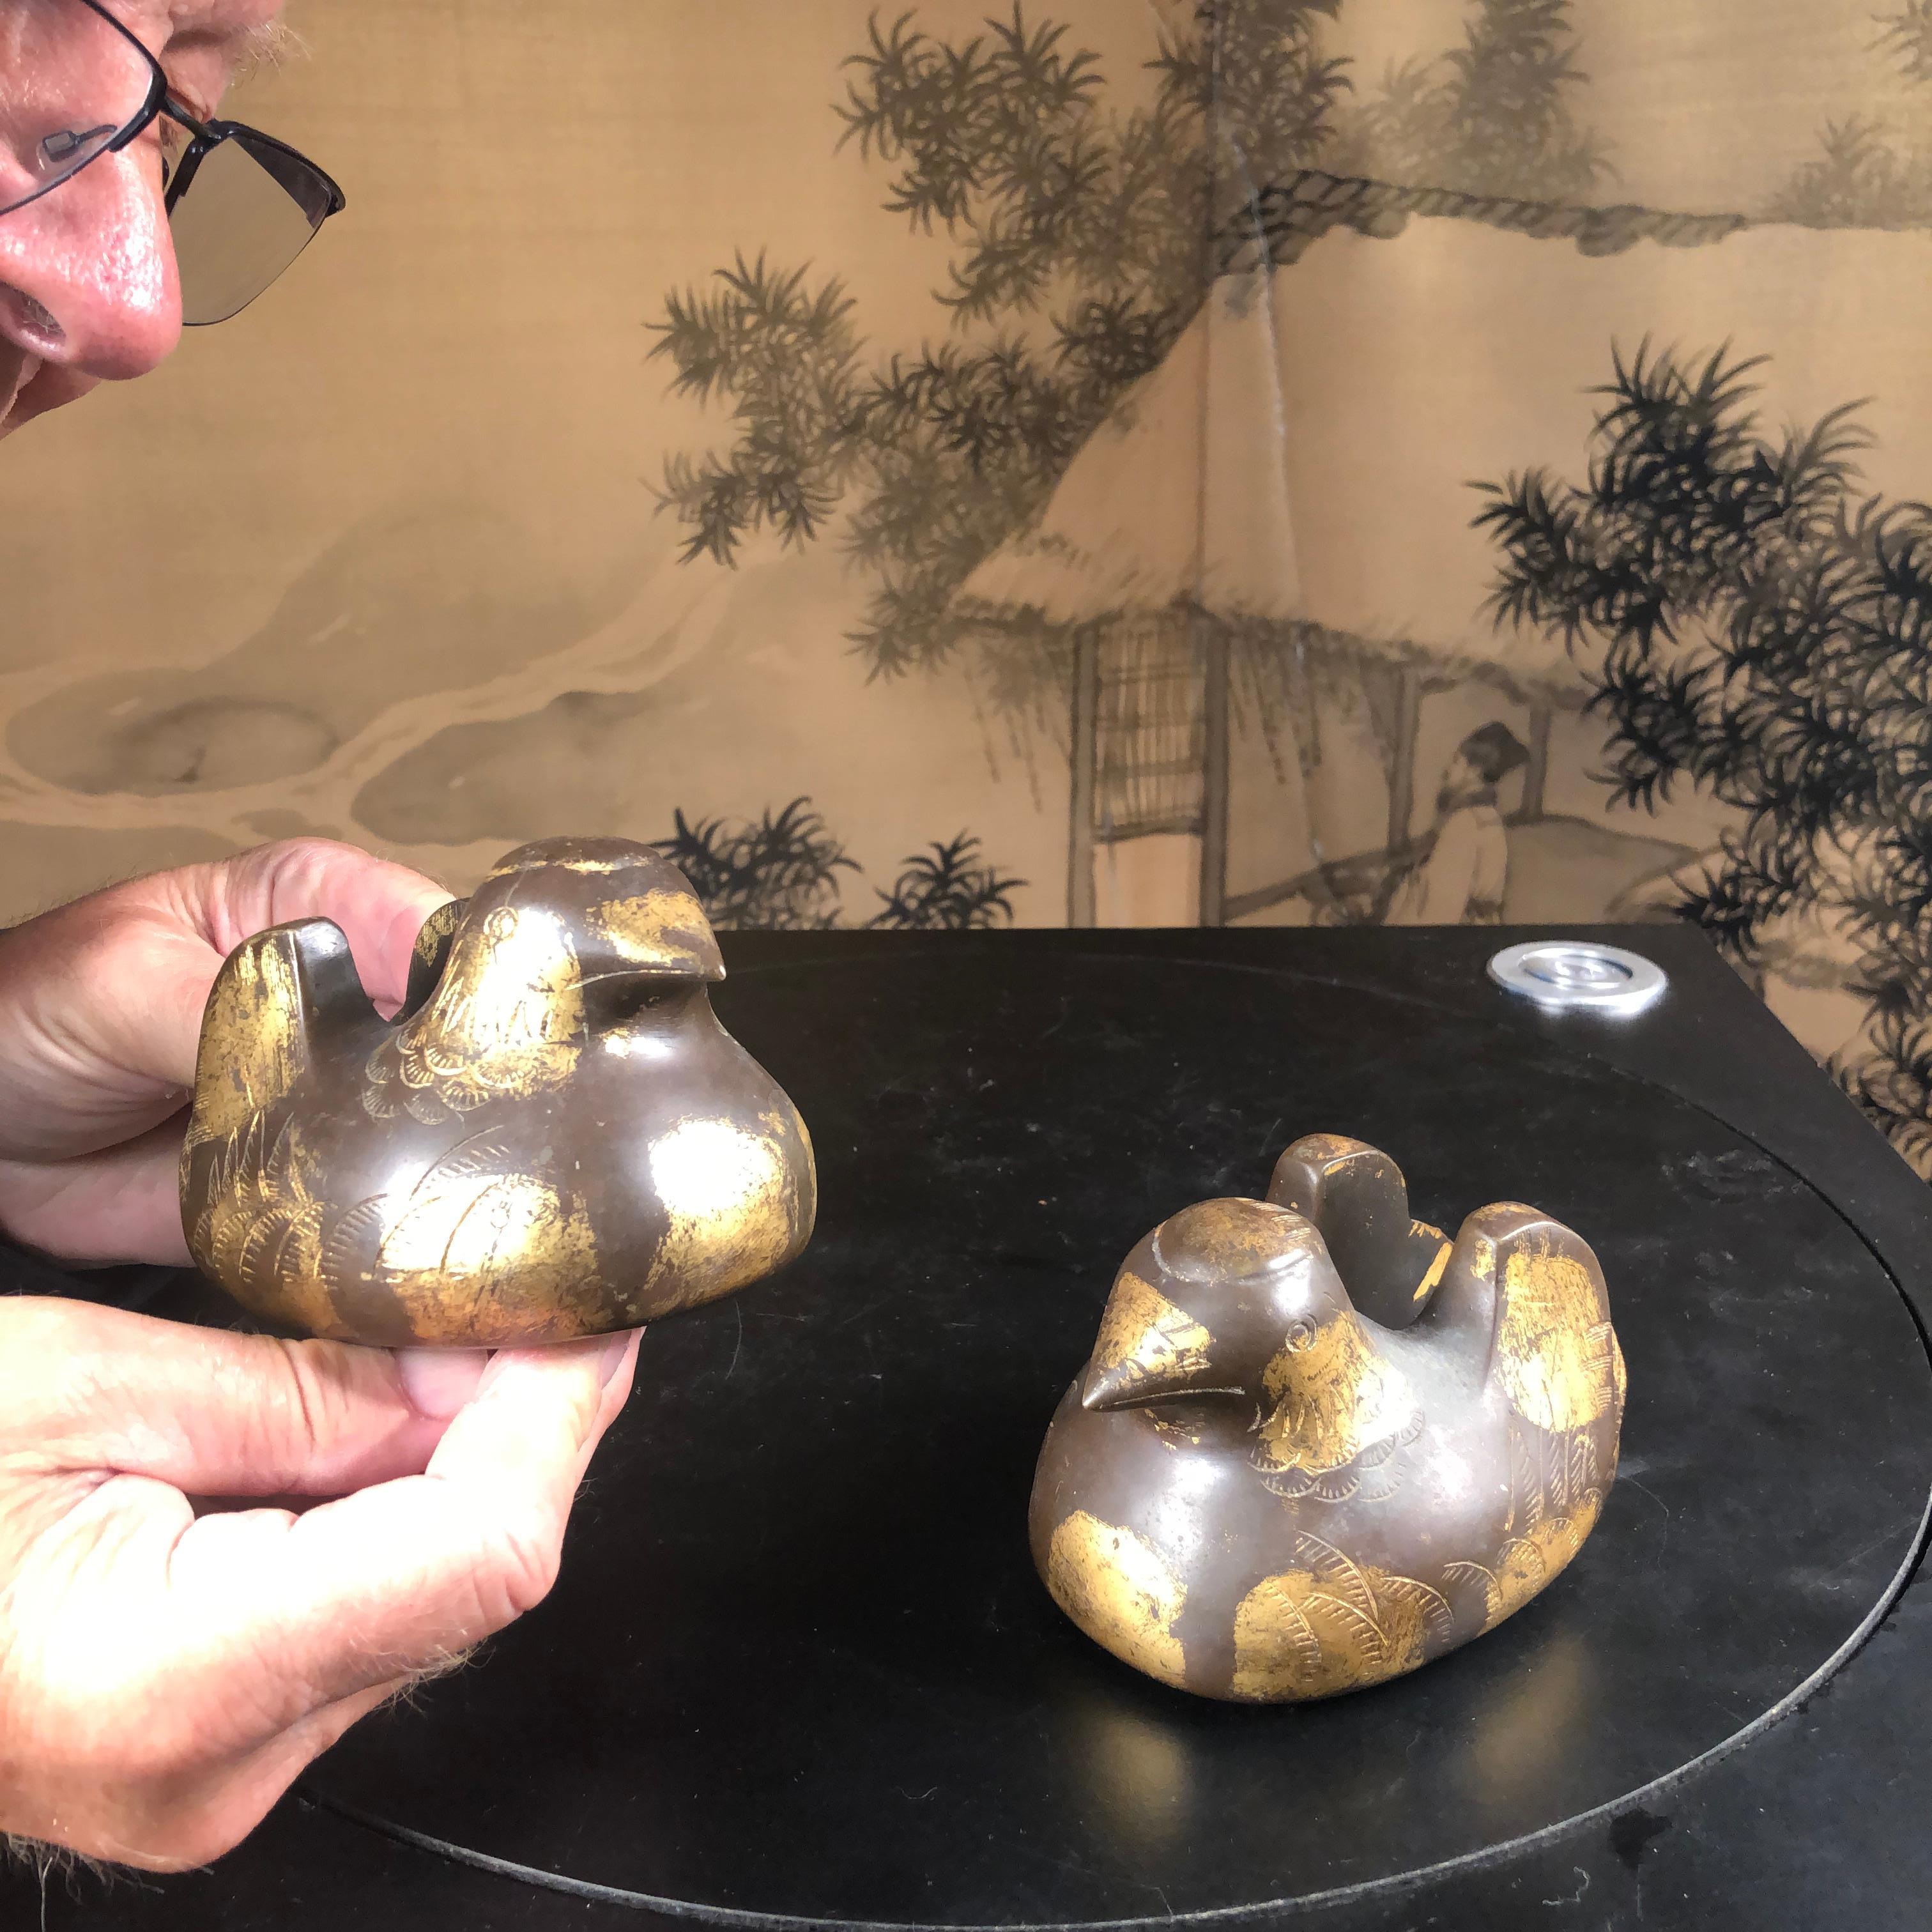 A fine pair of Japanese hand cast gold gilt bronze Mandarin Duck screen holders with highly detailed plumage, late Meiji period 19th century.

Each of these two sculptures are in remarkably very fine condition with much of the original gold